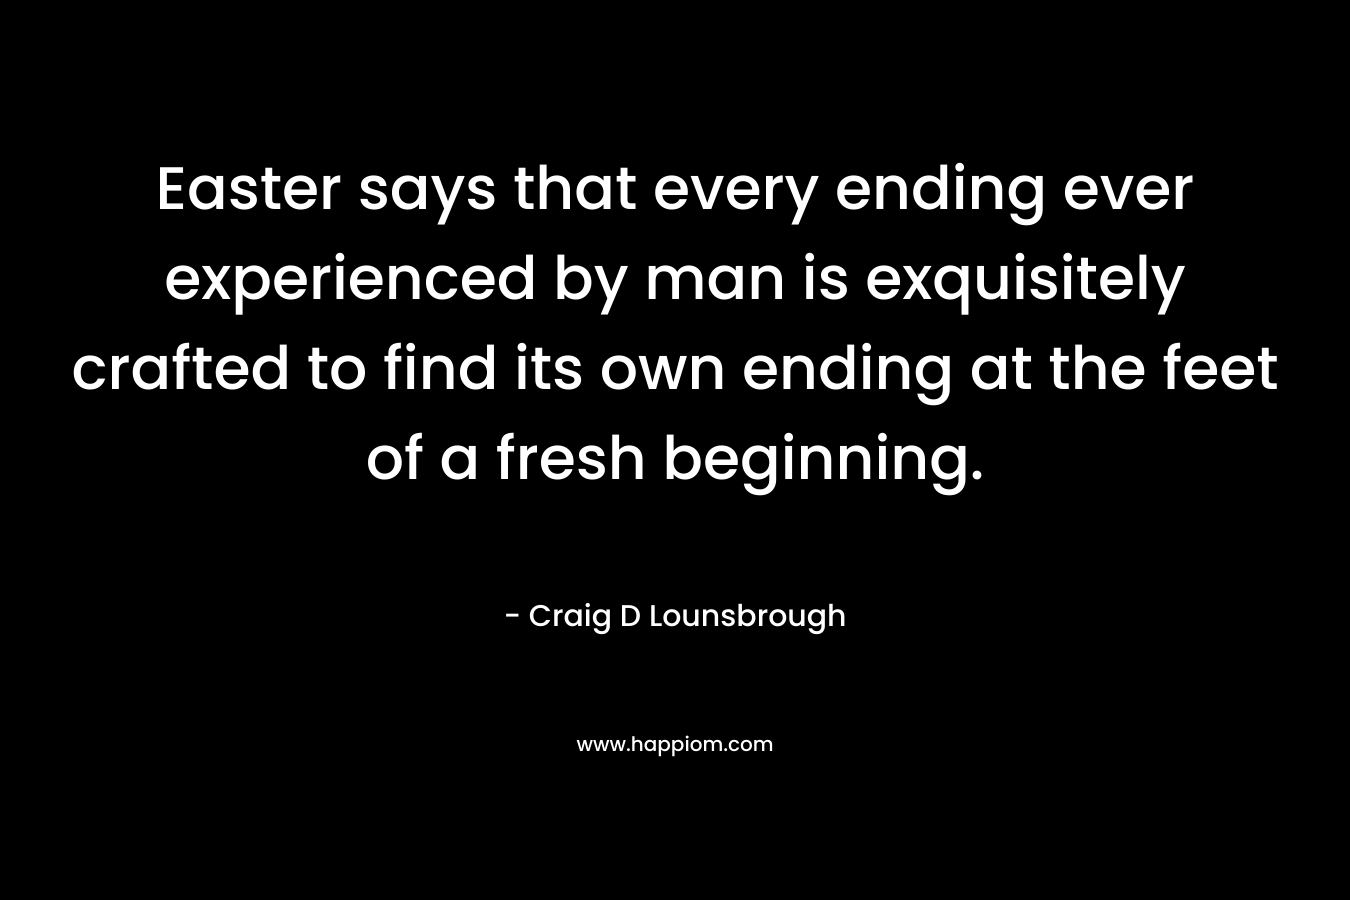 Easter says that every ending ever experienced by man is exquisitely crafted to find its own ending at the feet of a fresh beginning.